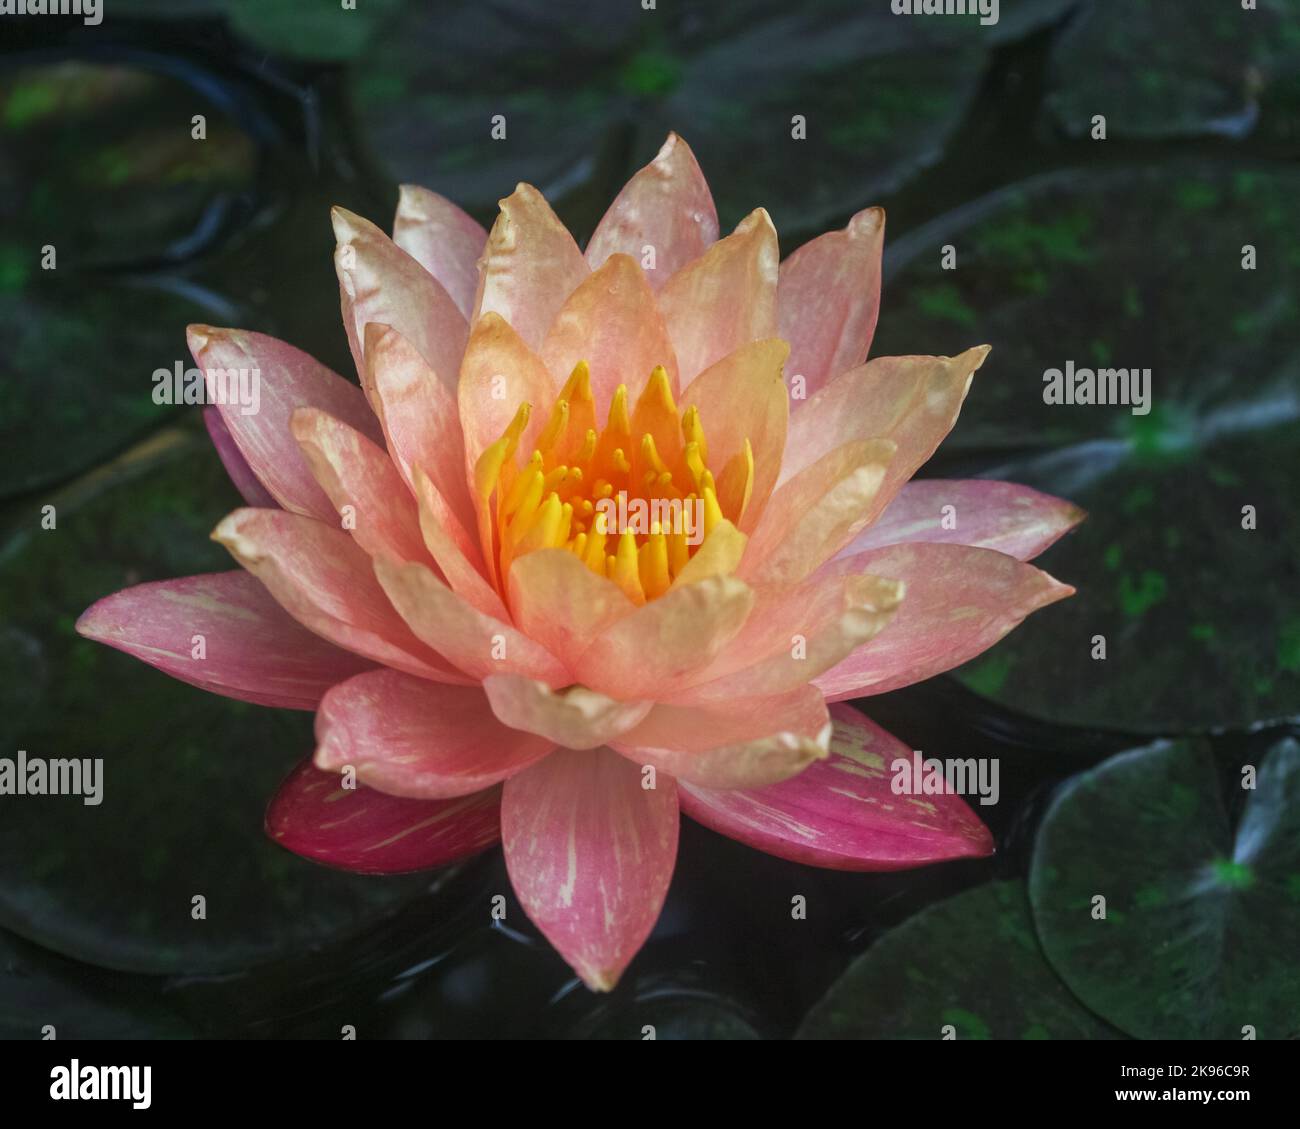 Closeup view of creamy pink orange water lily wanvisa nymphaea flower blooming outdoors on dark natural background Stock Photo